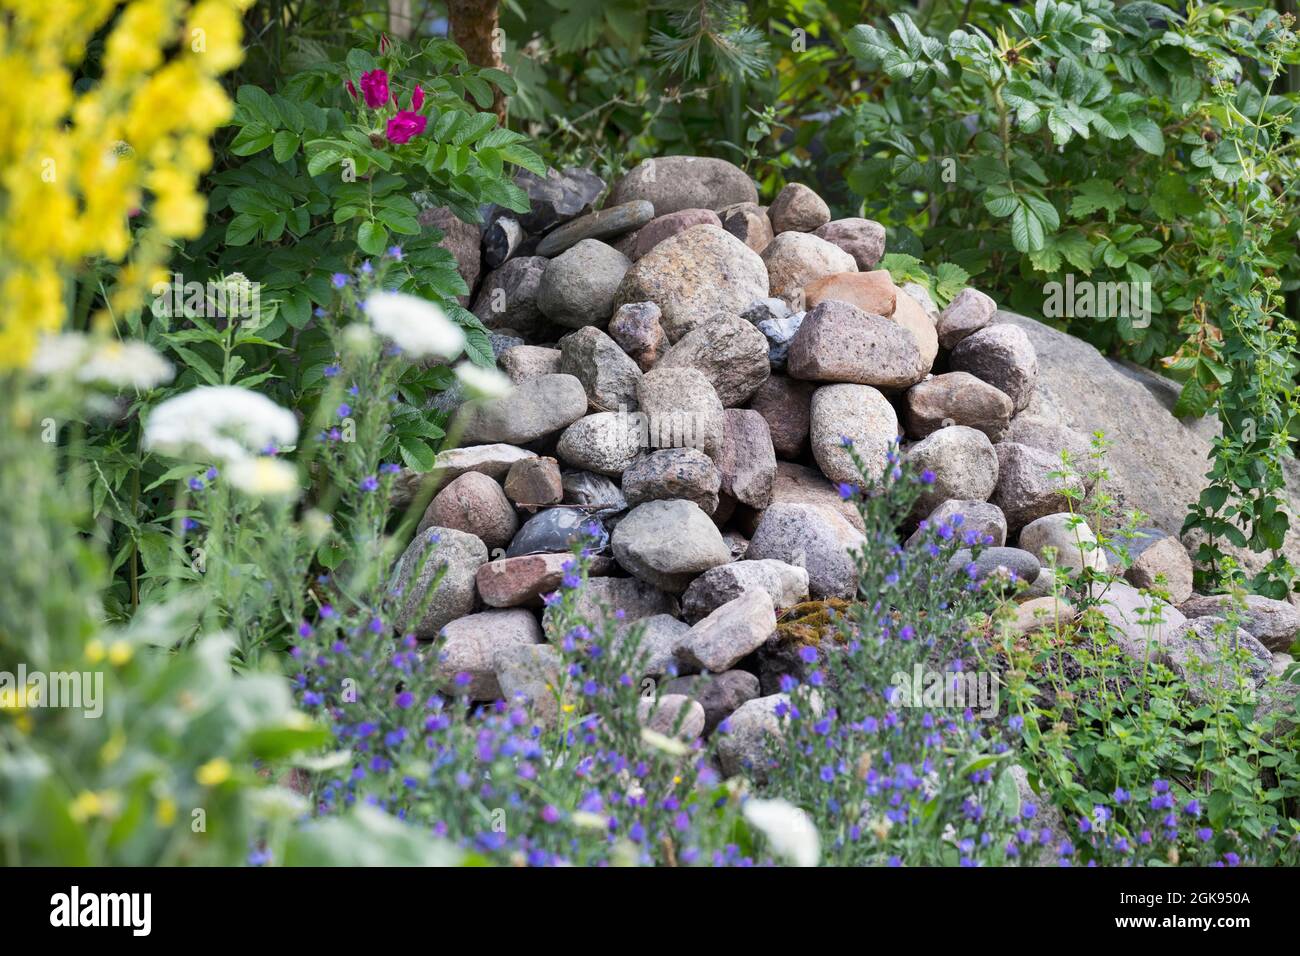 clearance cairn in the garden as a shelter for animals, Germany Stock Photo